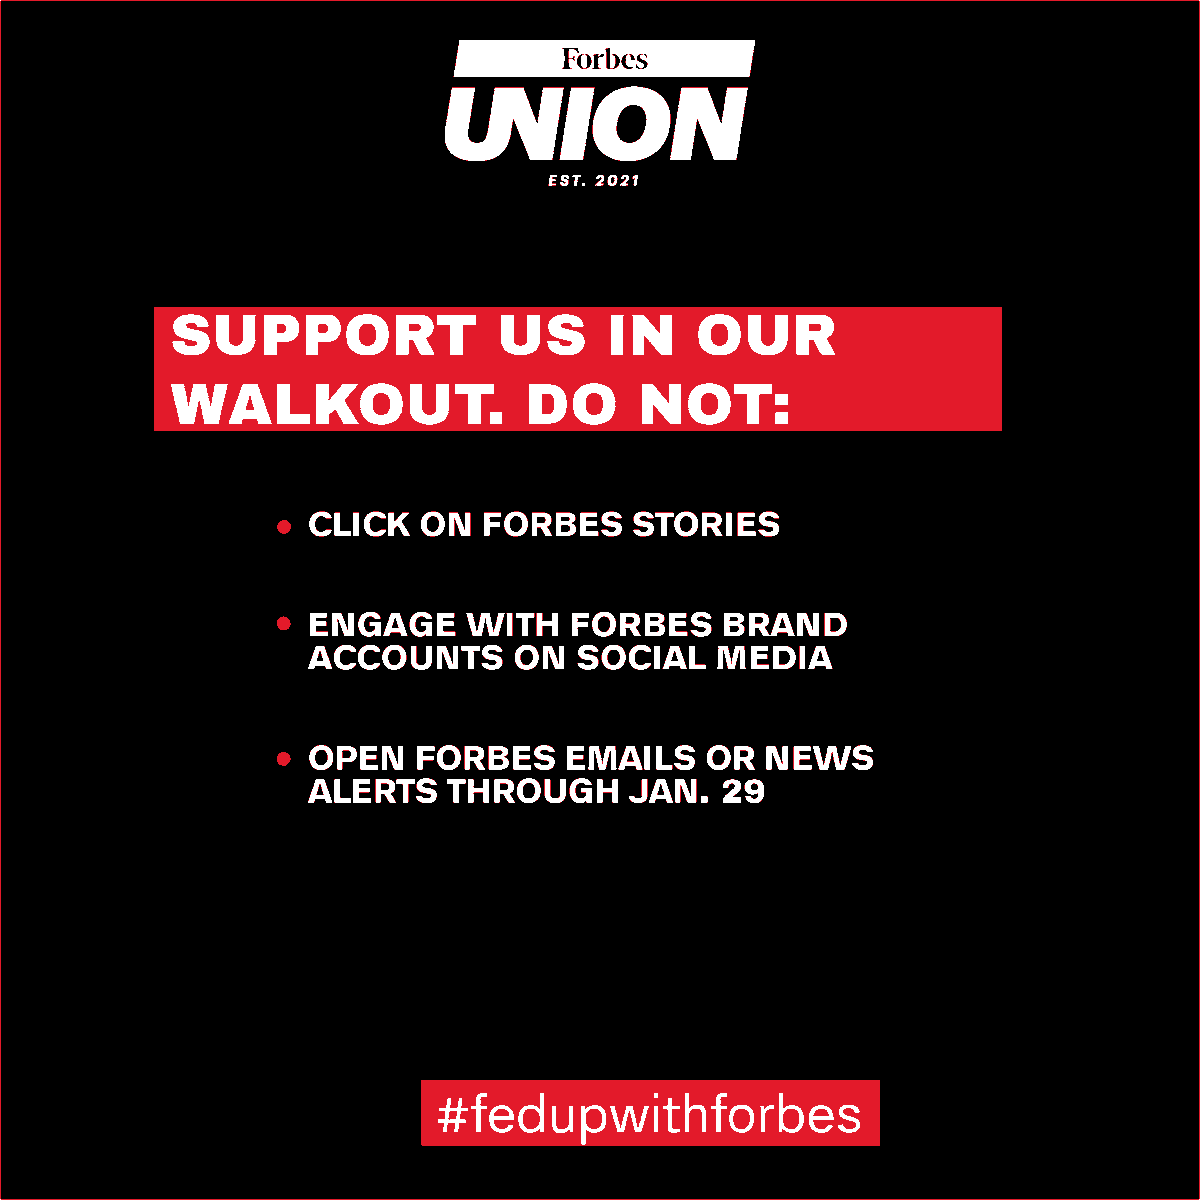 My teammates and I at Forbes just started a 3-day walkout. For 2 years, management has been slow-walking contract talks. It's time they stop the delays and threats and start bargaining in good faith! Please support us! Sign this petition: actionnetwork.org/petitions/sett…
#fedupwithforbes